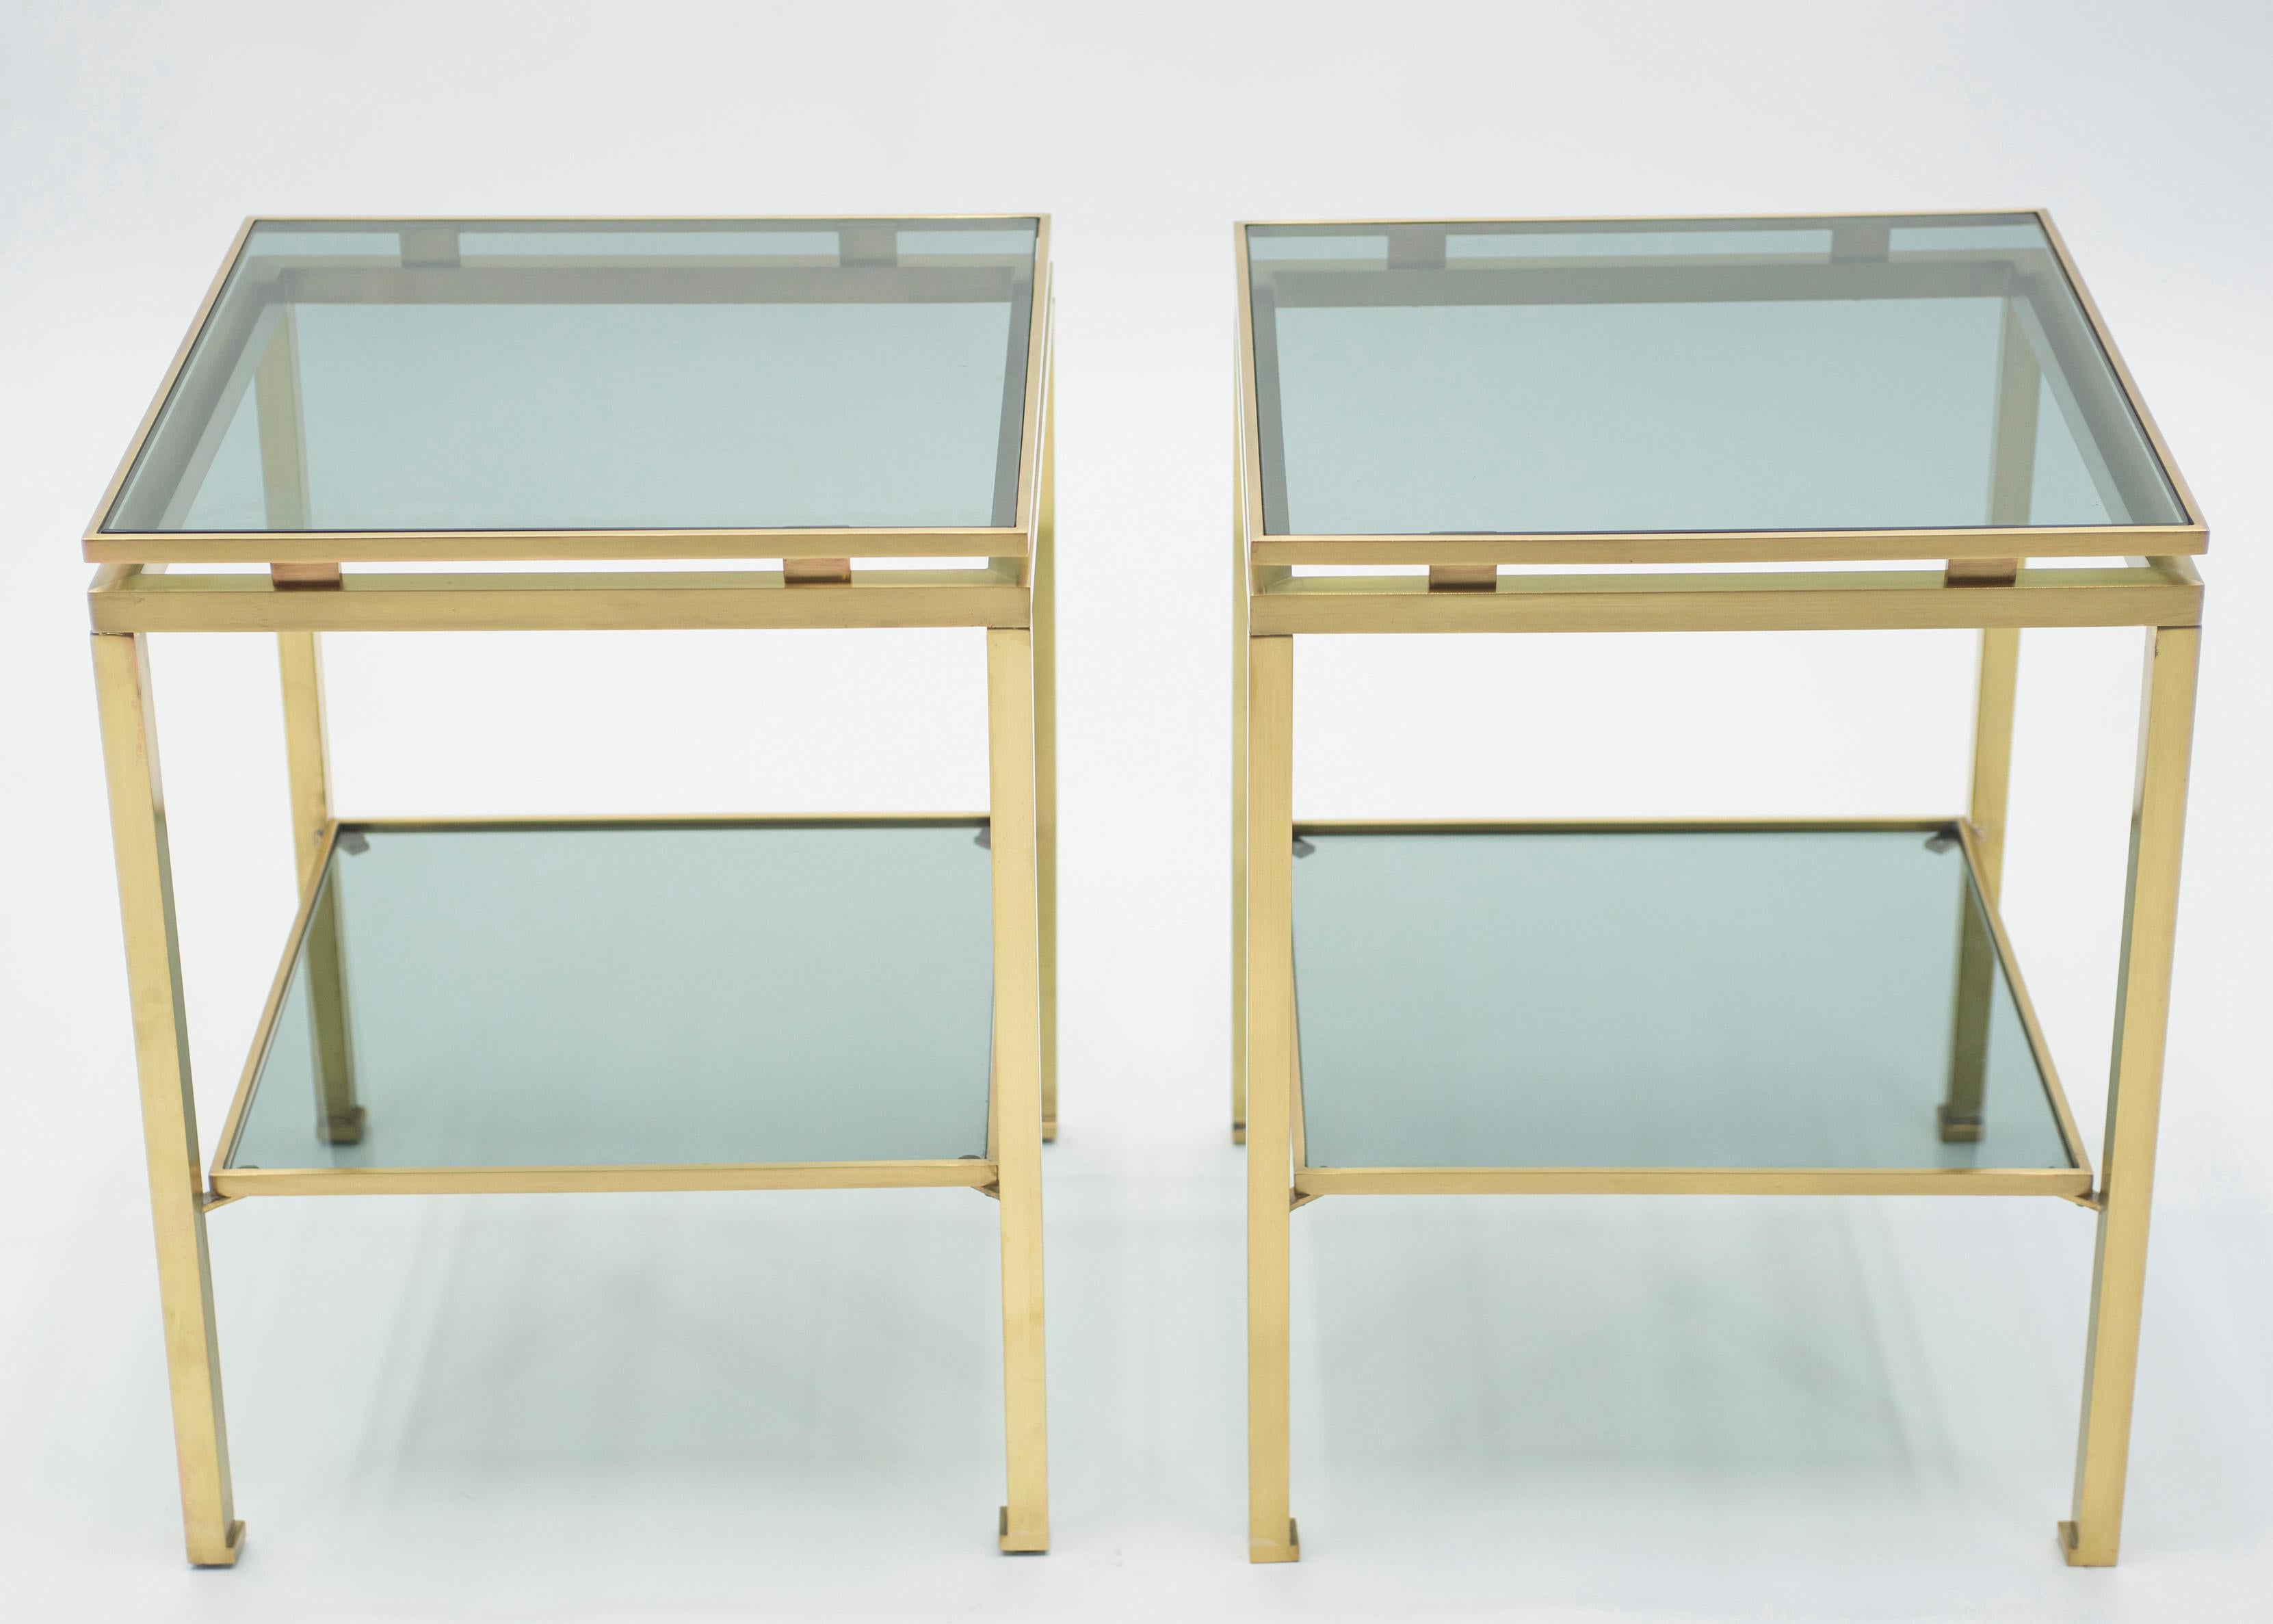 Simple lines point to this end tables French midcentury roots. Designed by Guy Lefevre for Maison Jansen, it features silky brass legs and slightly blue smoked glass tops. Its symmetry, elevated glass, and strong architectural design combine to